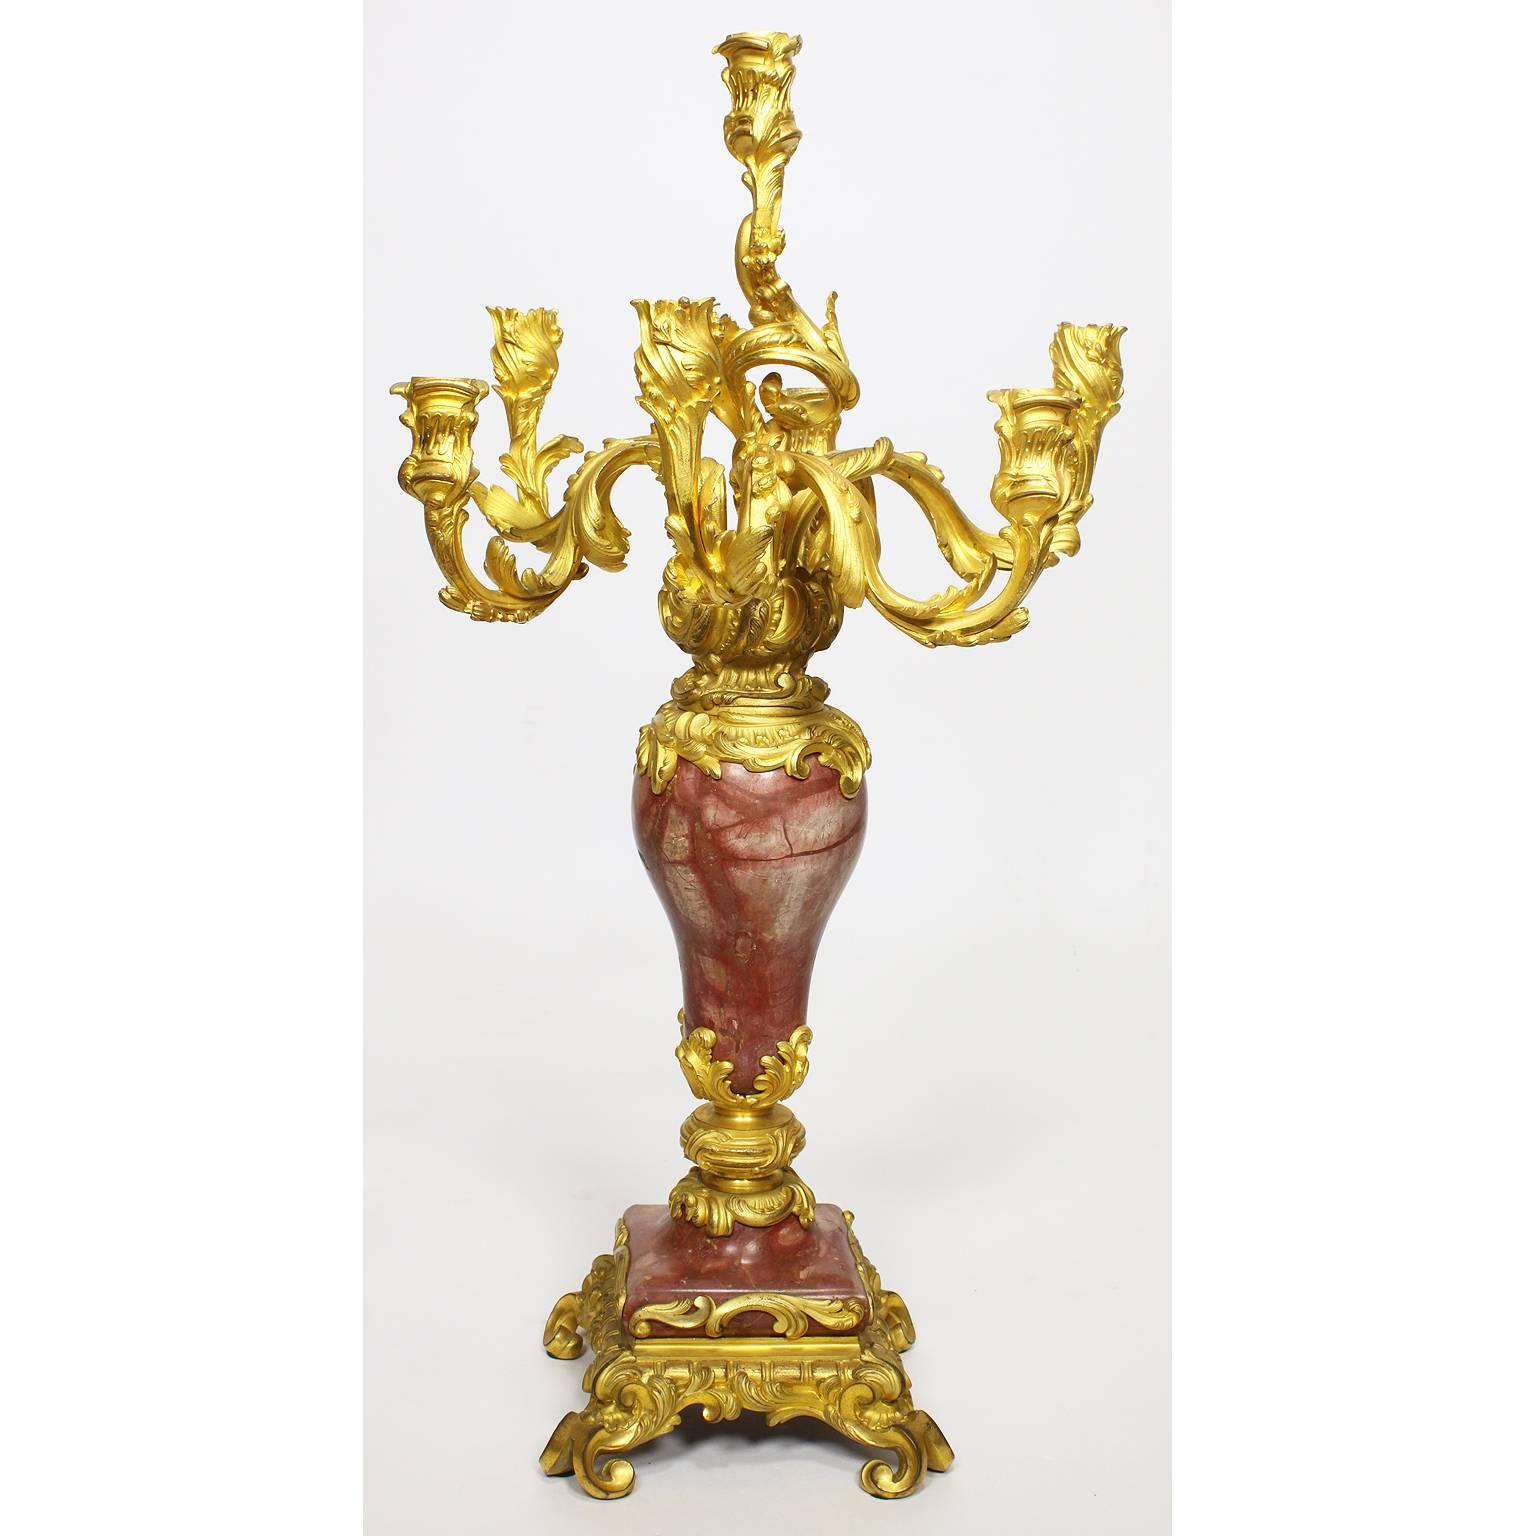 A very fine pair of French 19th century Louis XV style gilt-bronze and rouge royal marble seven-light candelabra. The ornate gilt-bronze candelabrum with six scrolled candle-arms and a single middle candle-holder, surmounted with flowers, all